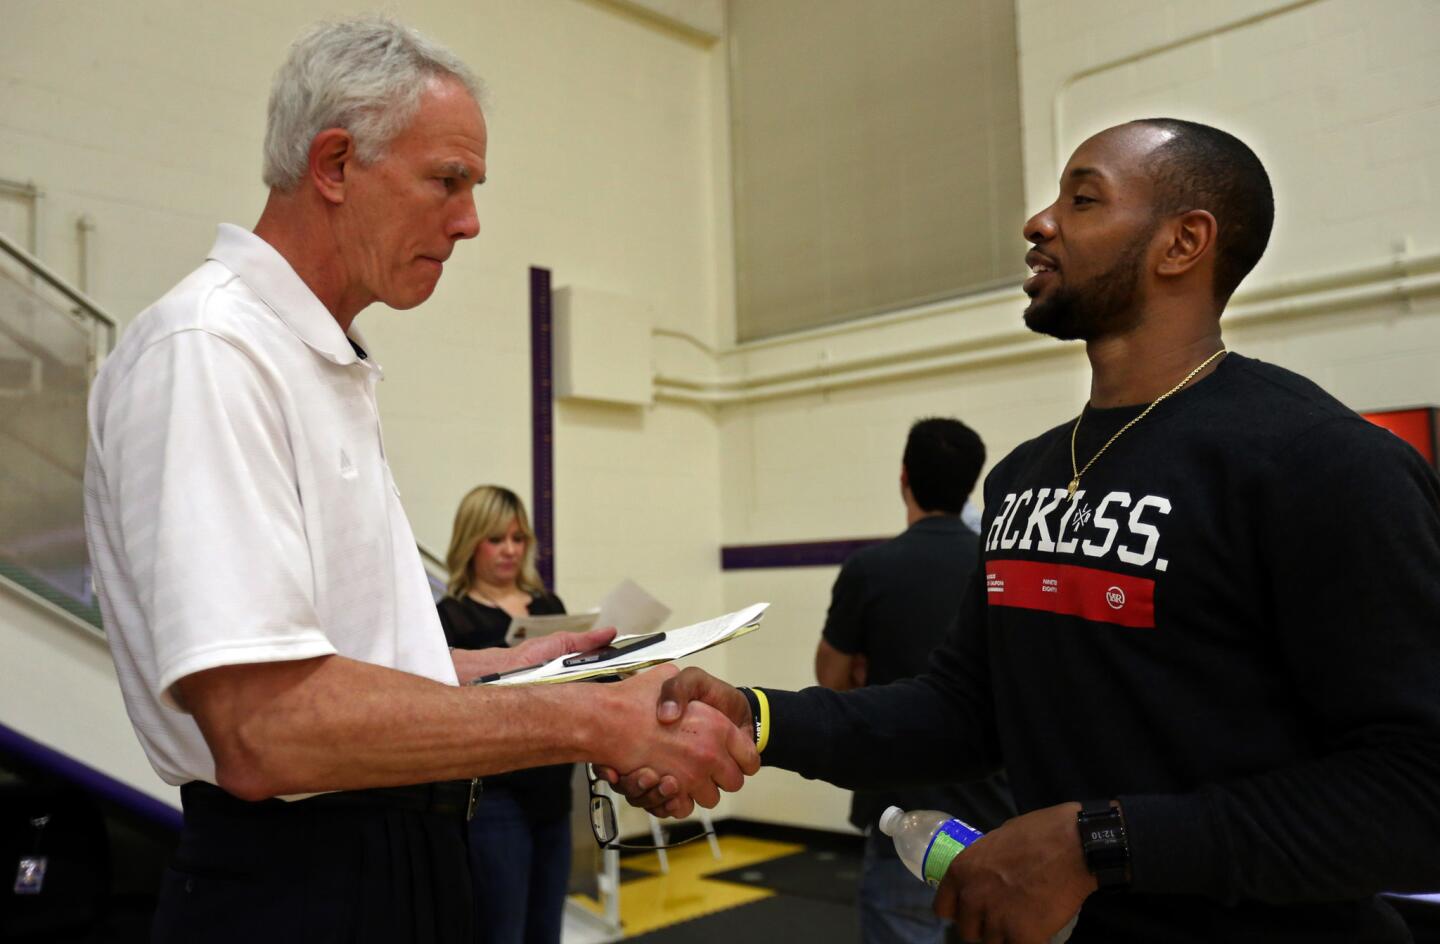 Lakers general manager Mitch Kupchak greets former Terps star Dez Wells after a May workout.